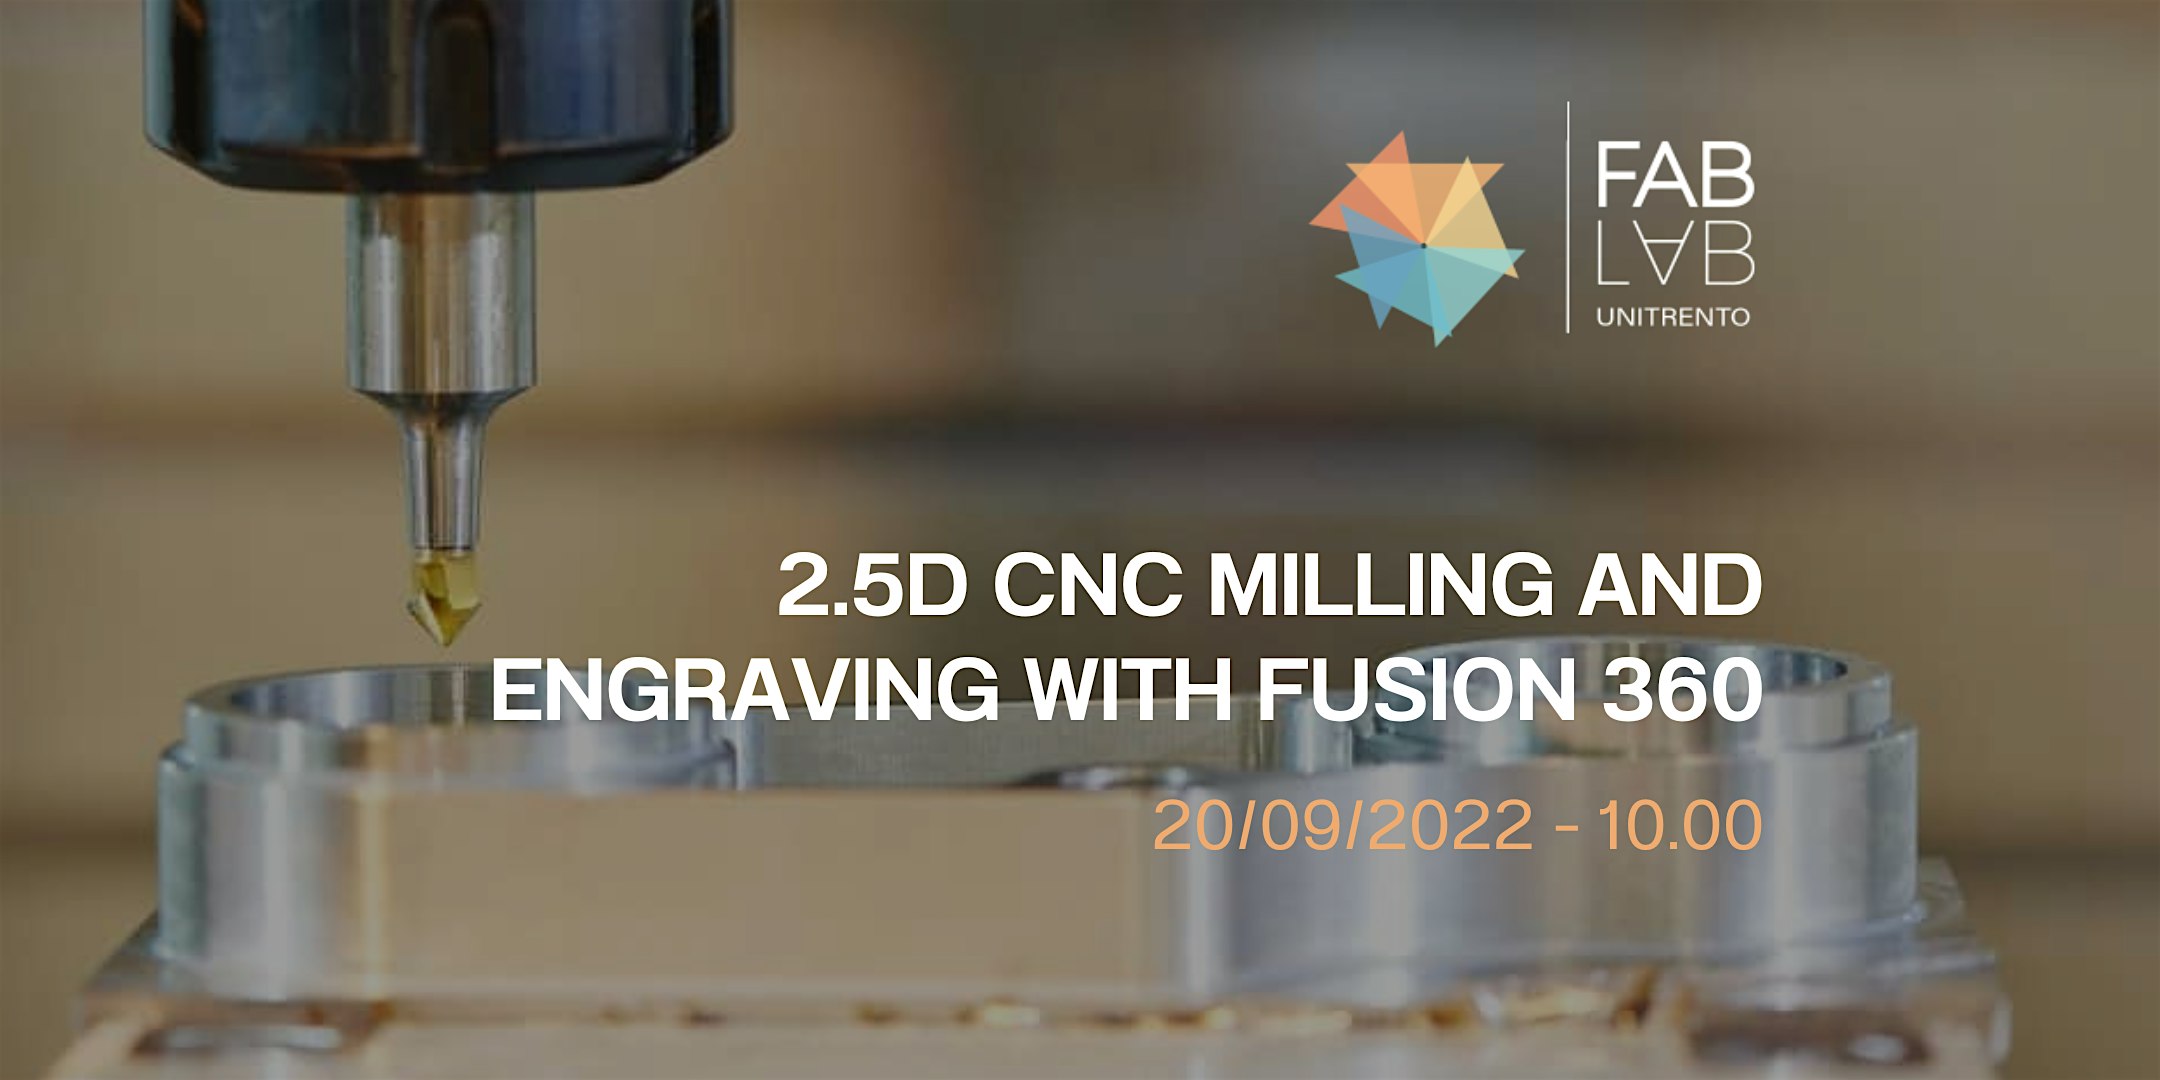 2.5D CNC Milling and Engraving with Fusion 360